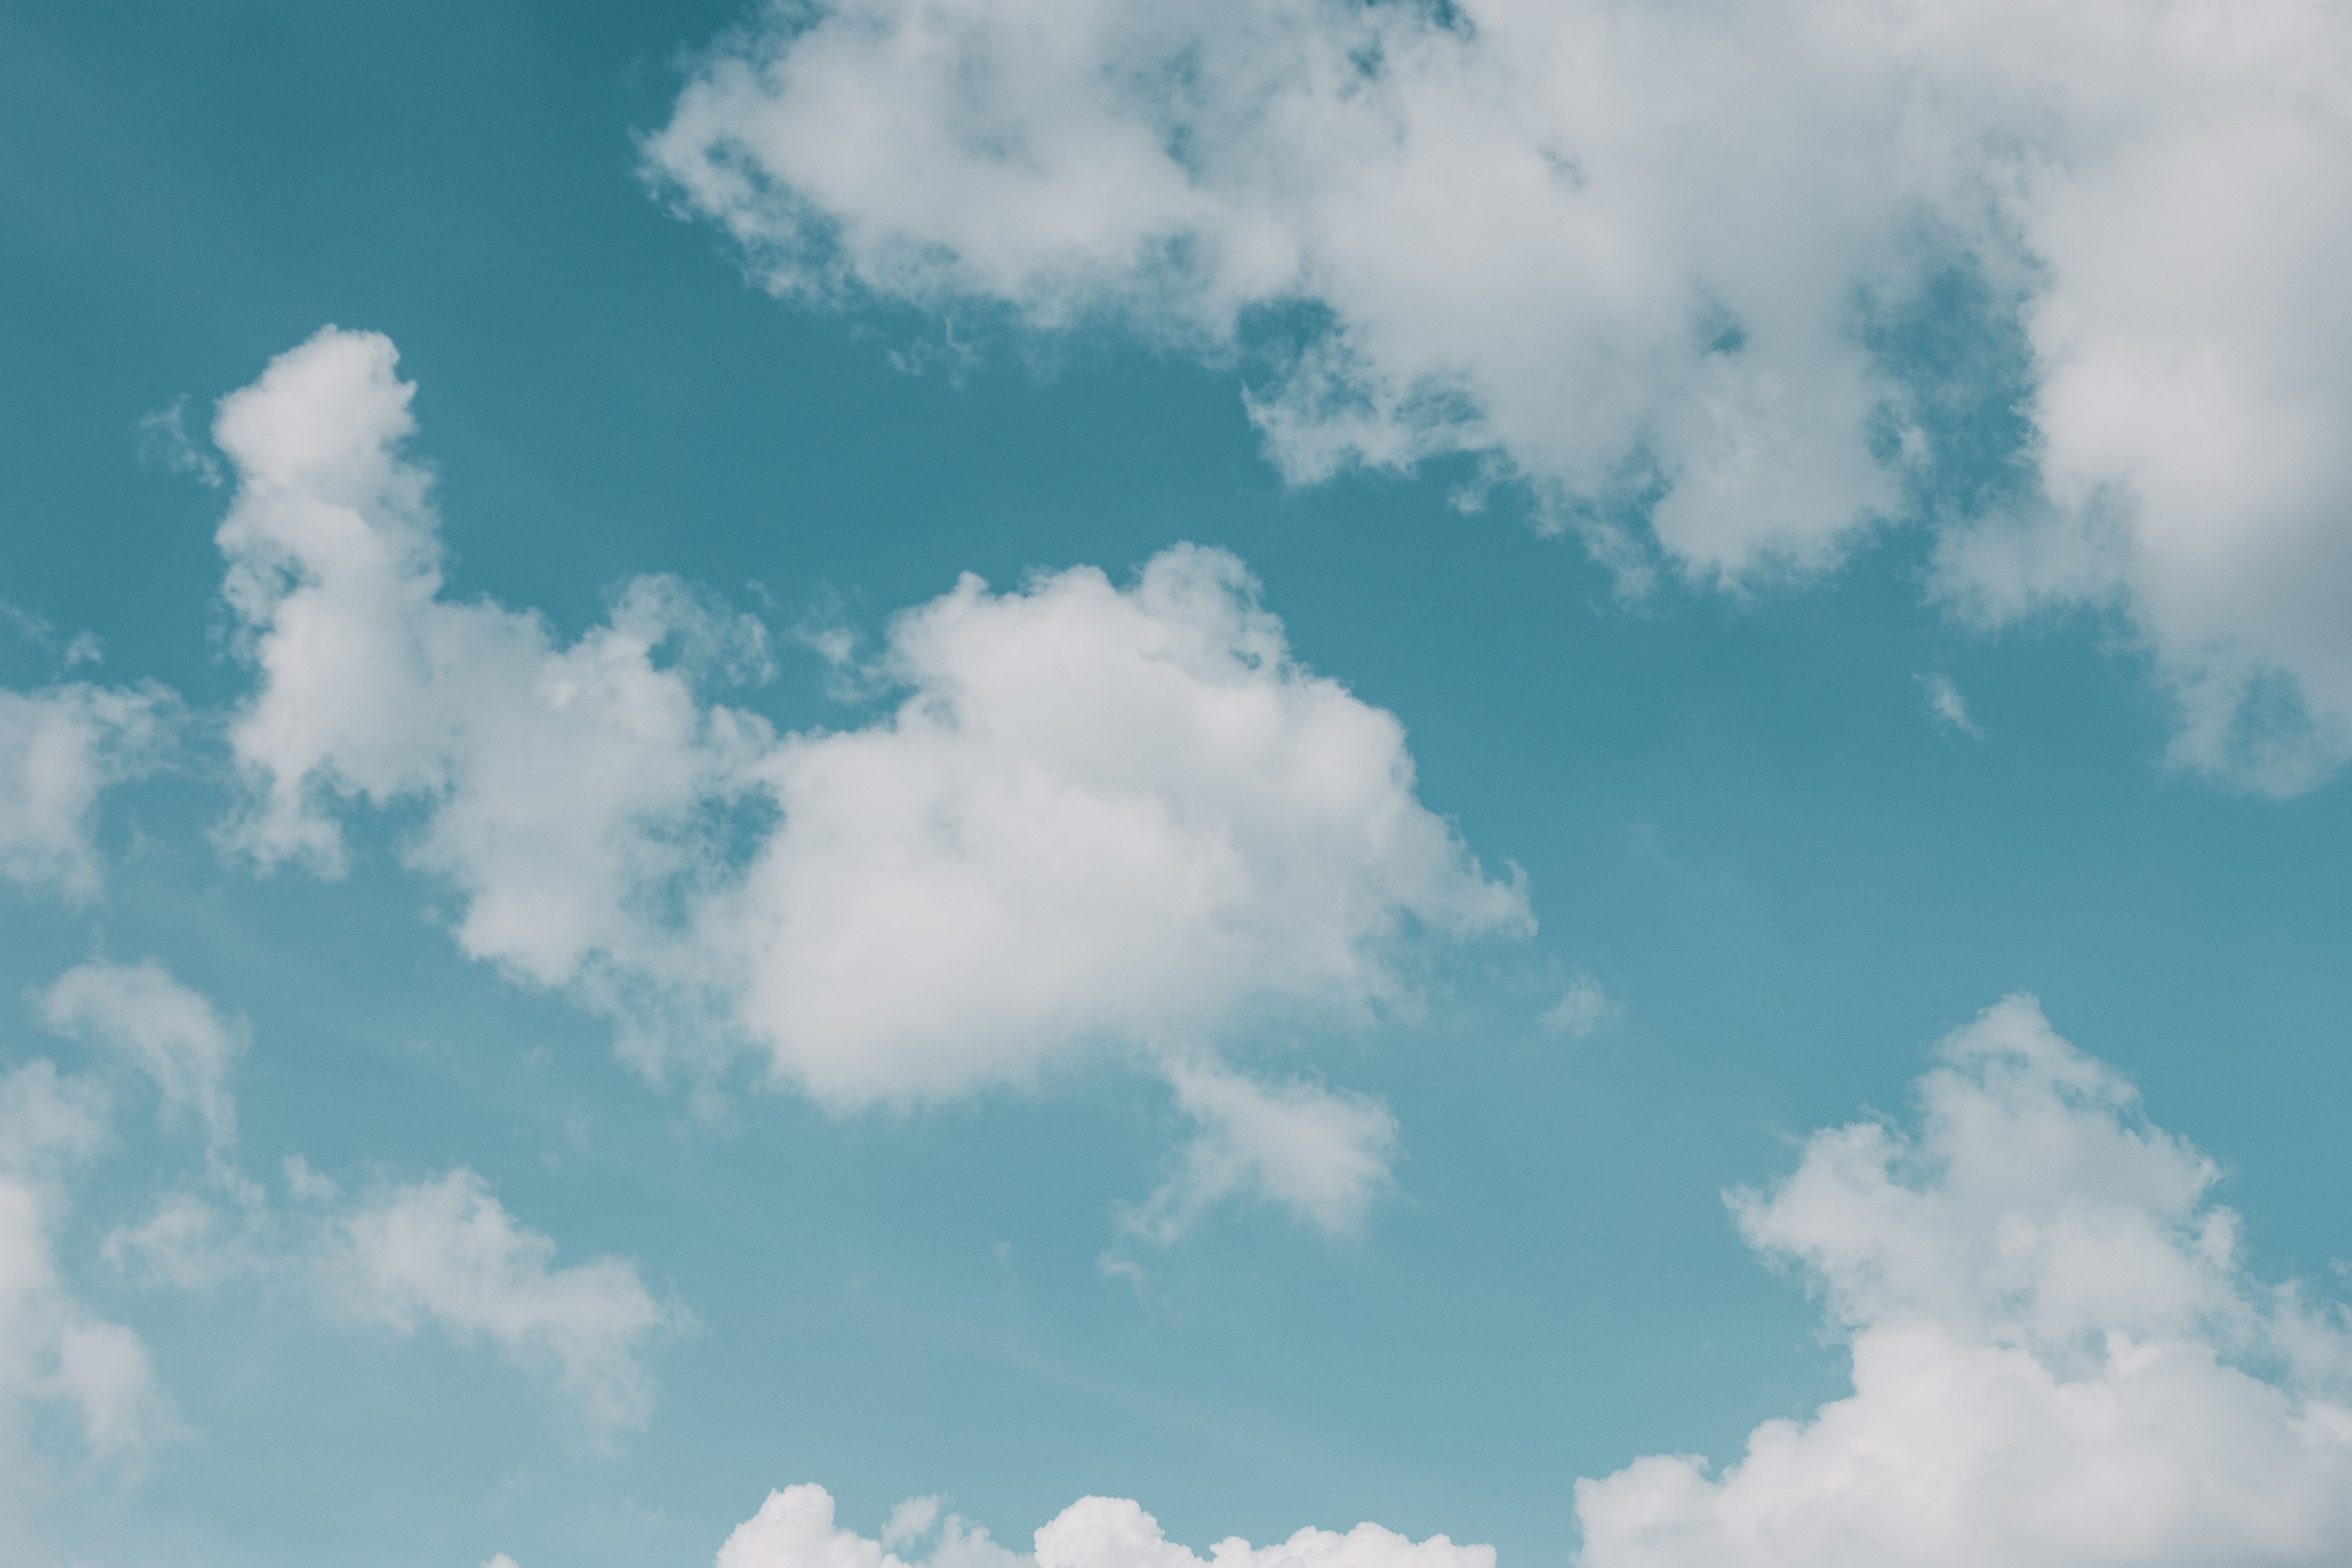 5184x3456 Public domain image, minimal, cool background, minimalistic, wallpaper, free, landscape, cool wallpaper, nature, cloudscape, photo, minimalism, minimalist, chill, sky, traveling, blue sky, cloud, texture, summer, blue. Mocah HD